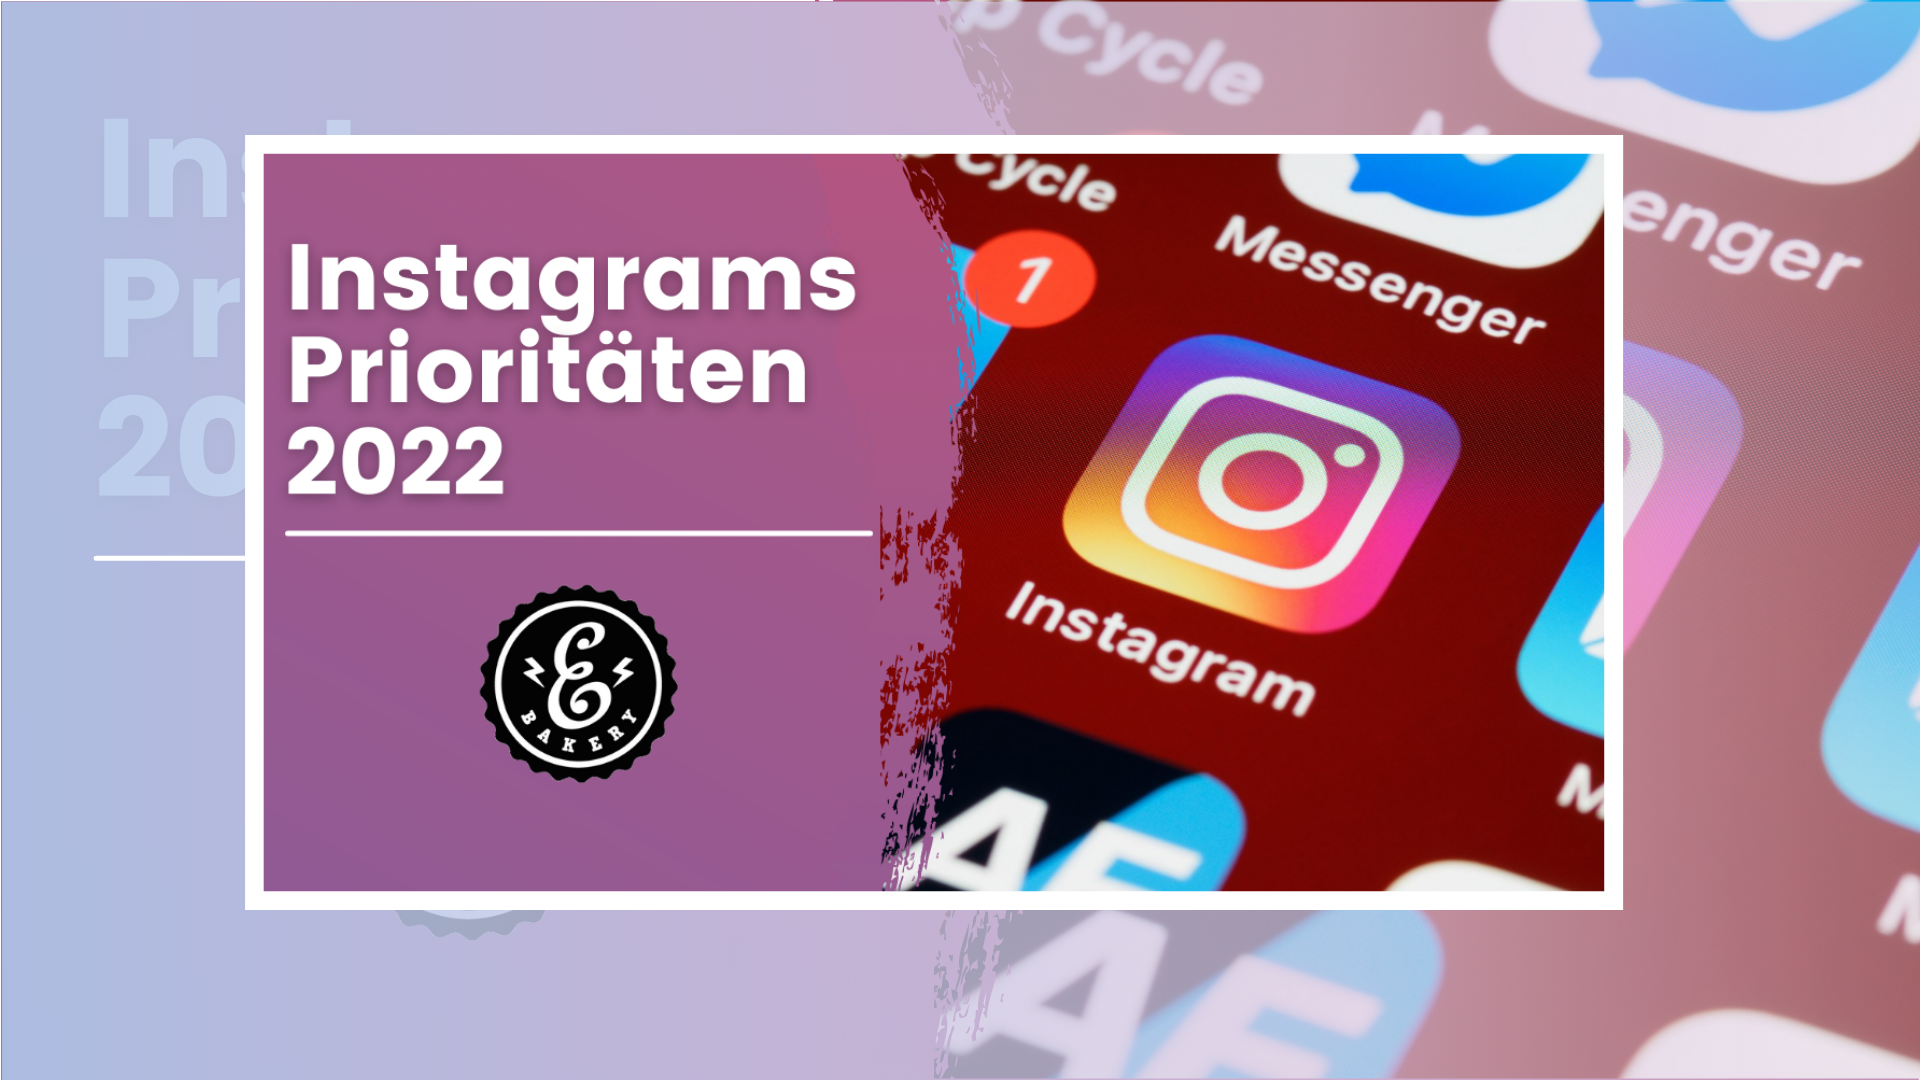 Instagram’s 2022 priorities – These are the 4 areas Instagram is focusing on